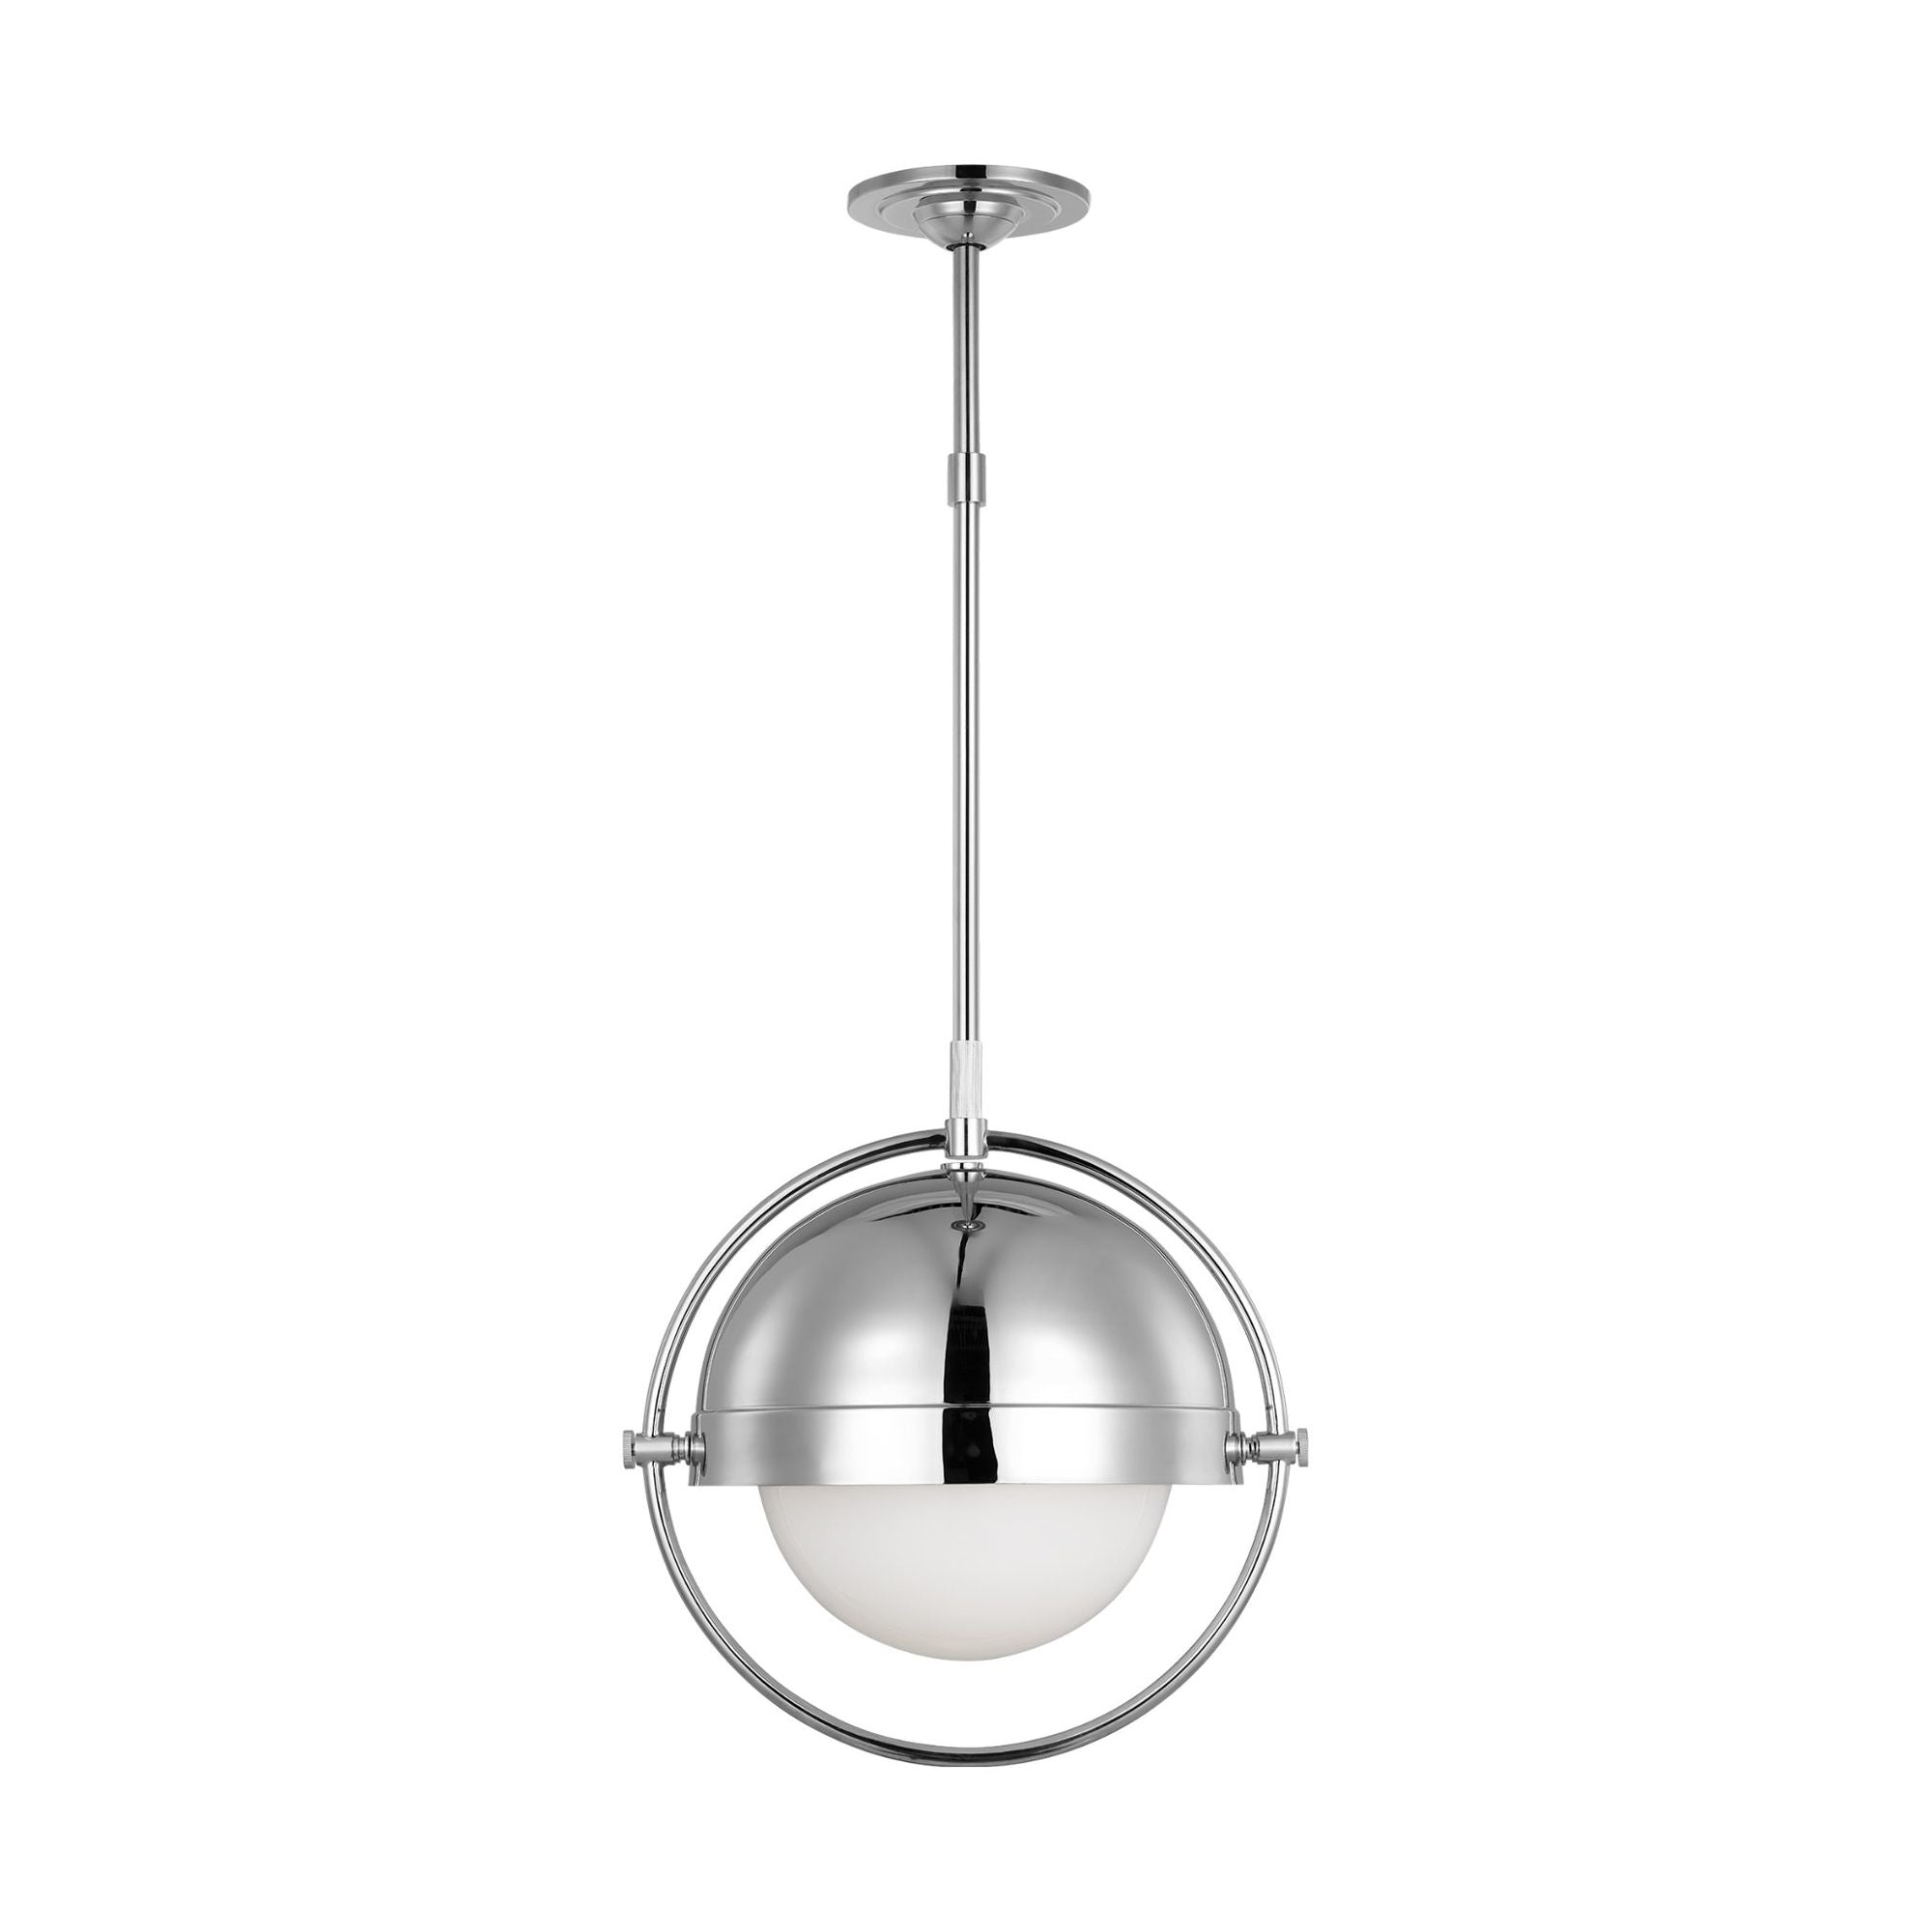 Thomas O'Brien Bacall Large Pendant in Polished Nickel